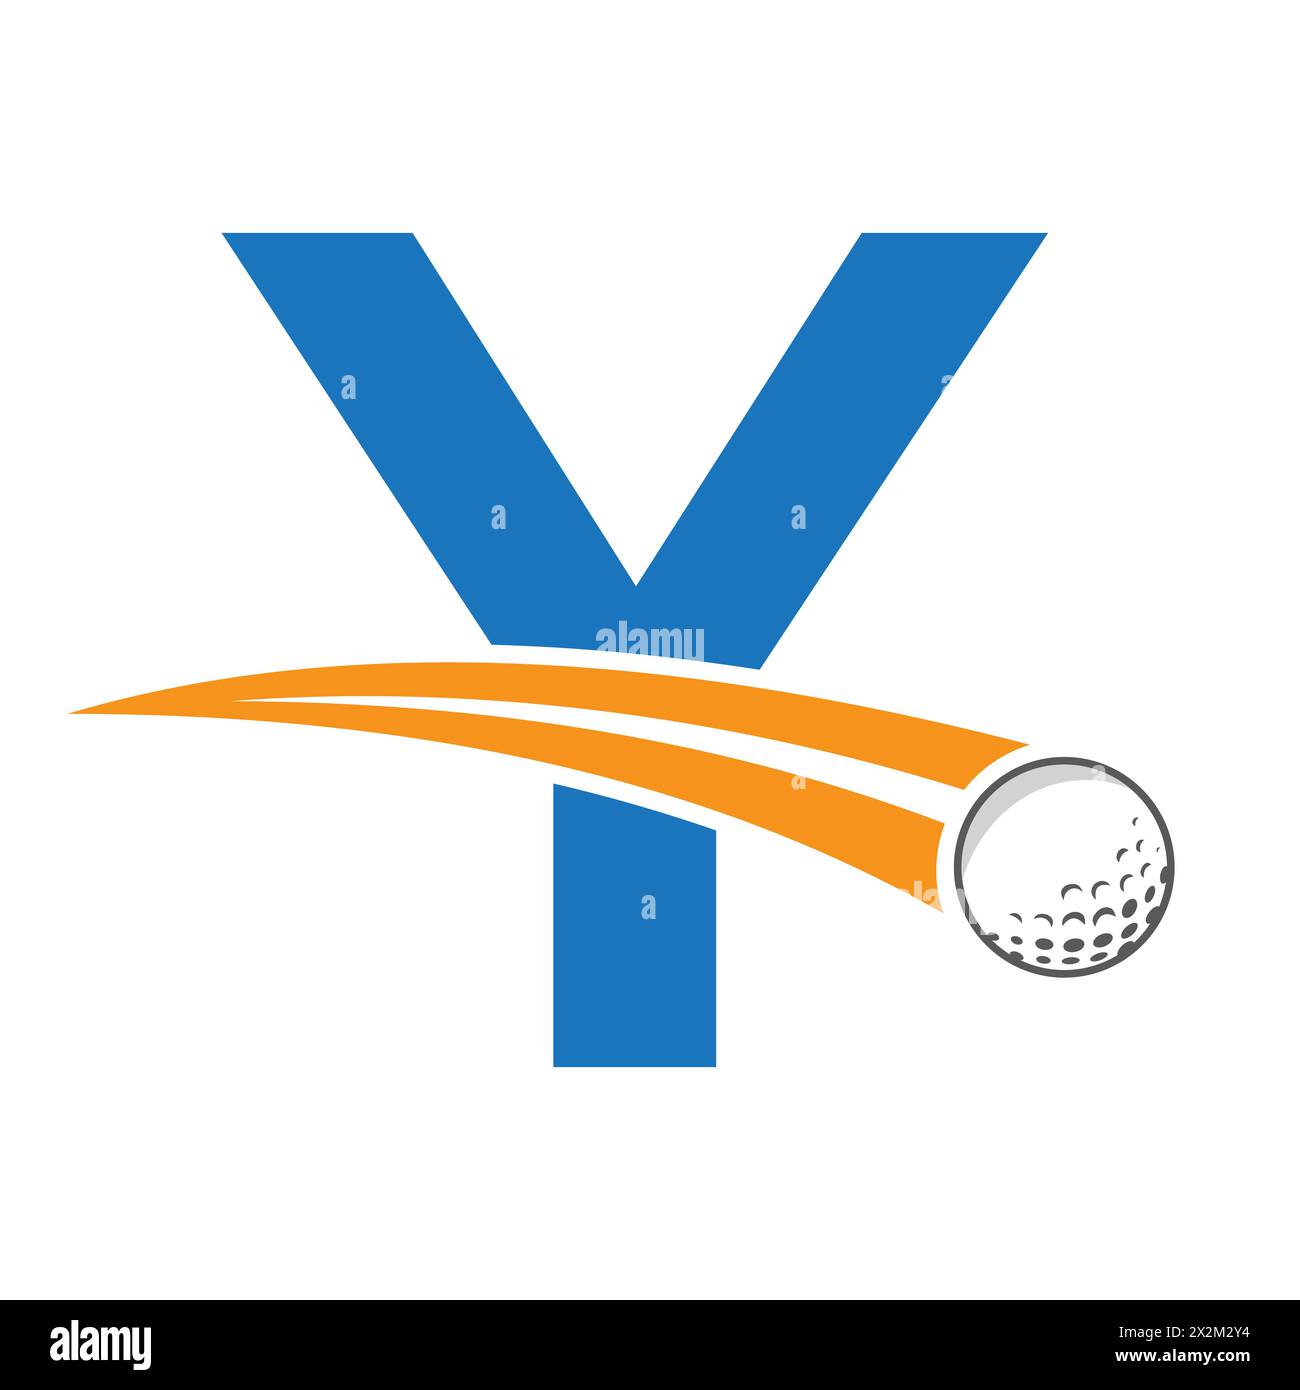 Golf Logo On Letter Y Concept With Moving Golf ball Symbol. Hockey Sign Stock Vector